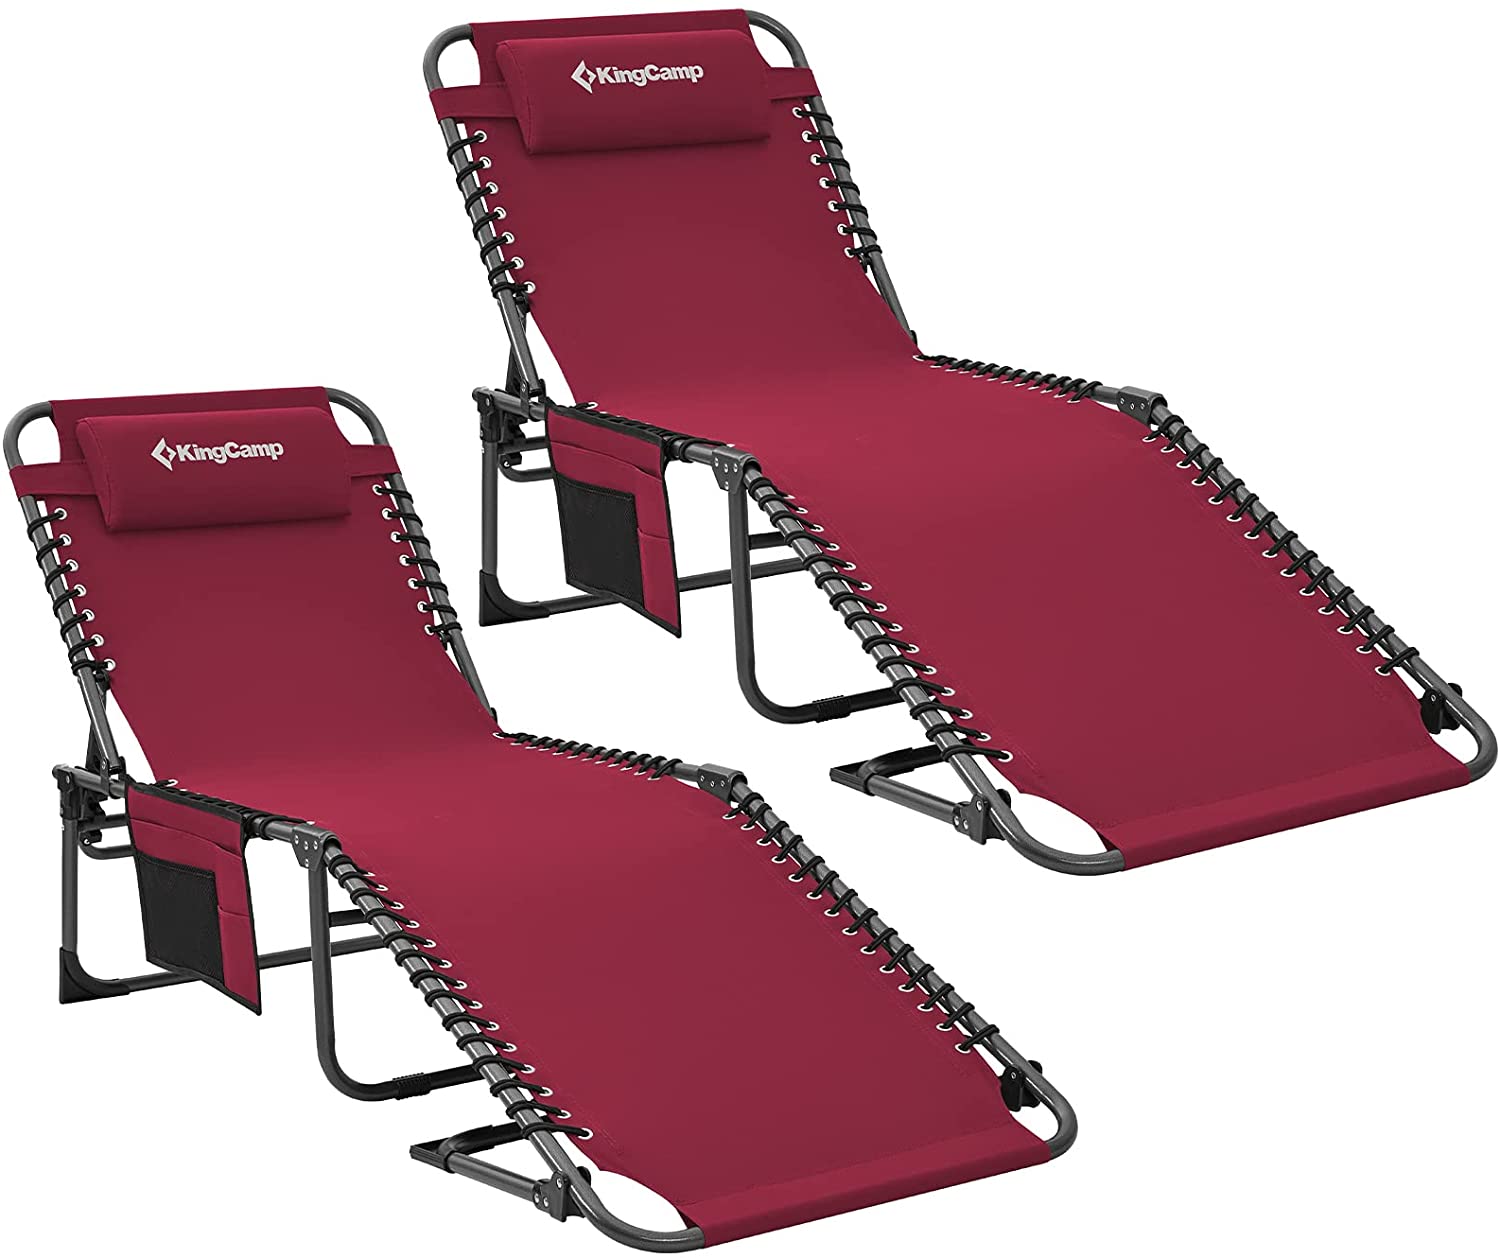 KingCamp 4-Position Folding Chaise